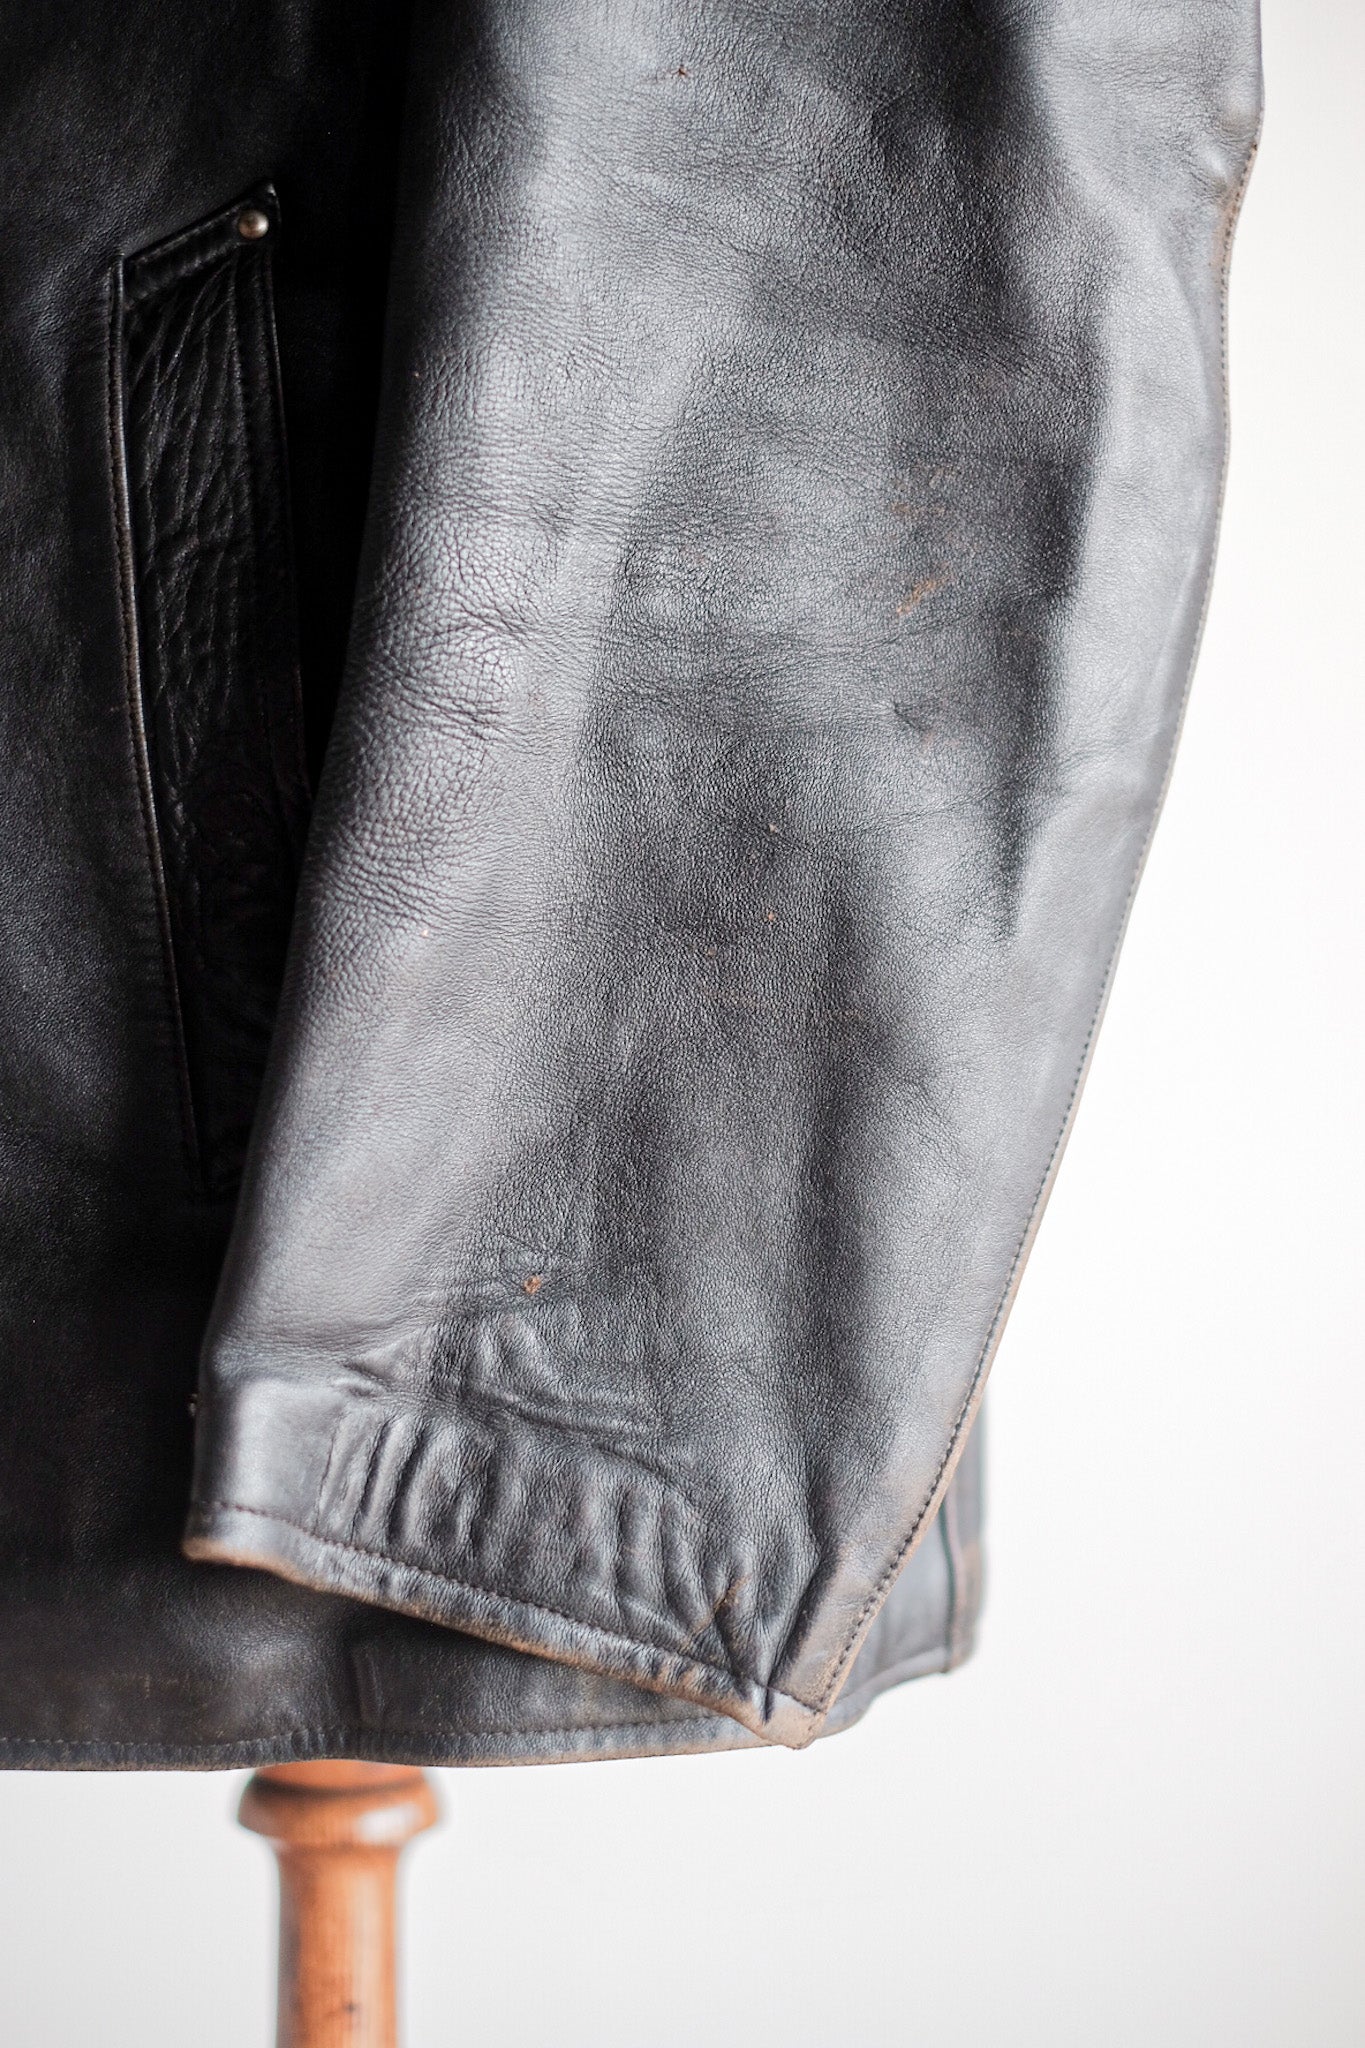 【~50's】French Vintage Le Corbusier Leather Work Jacket